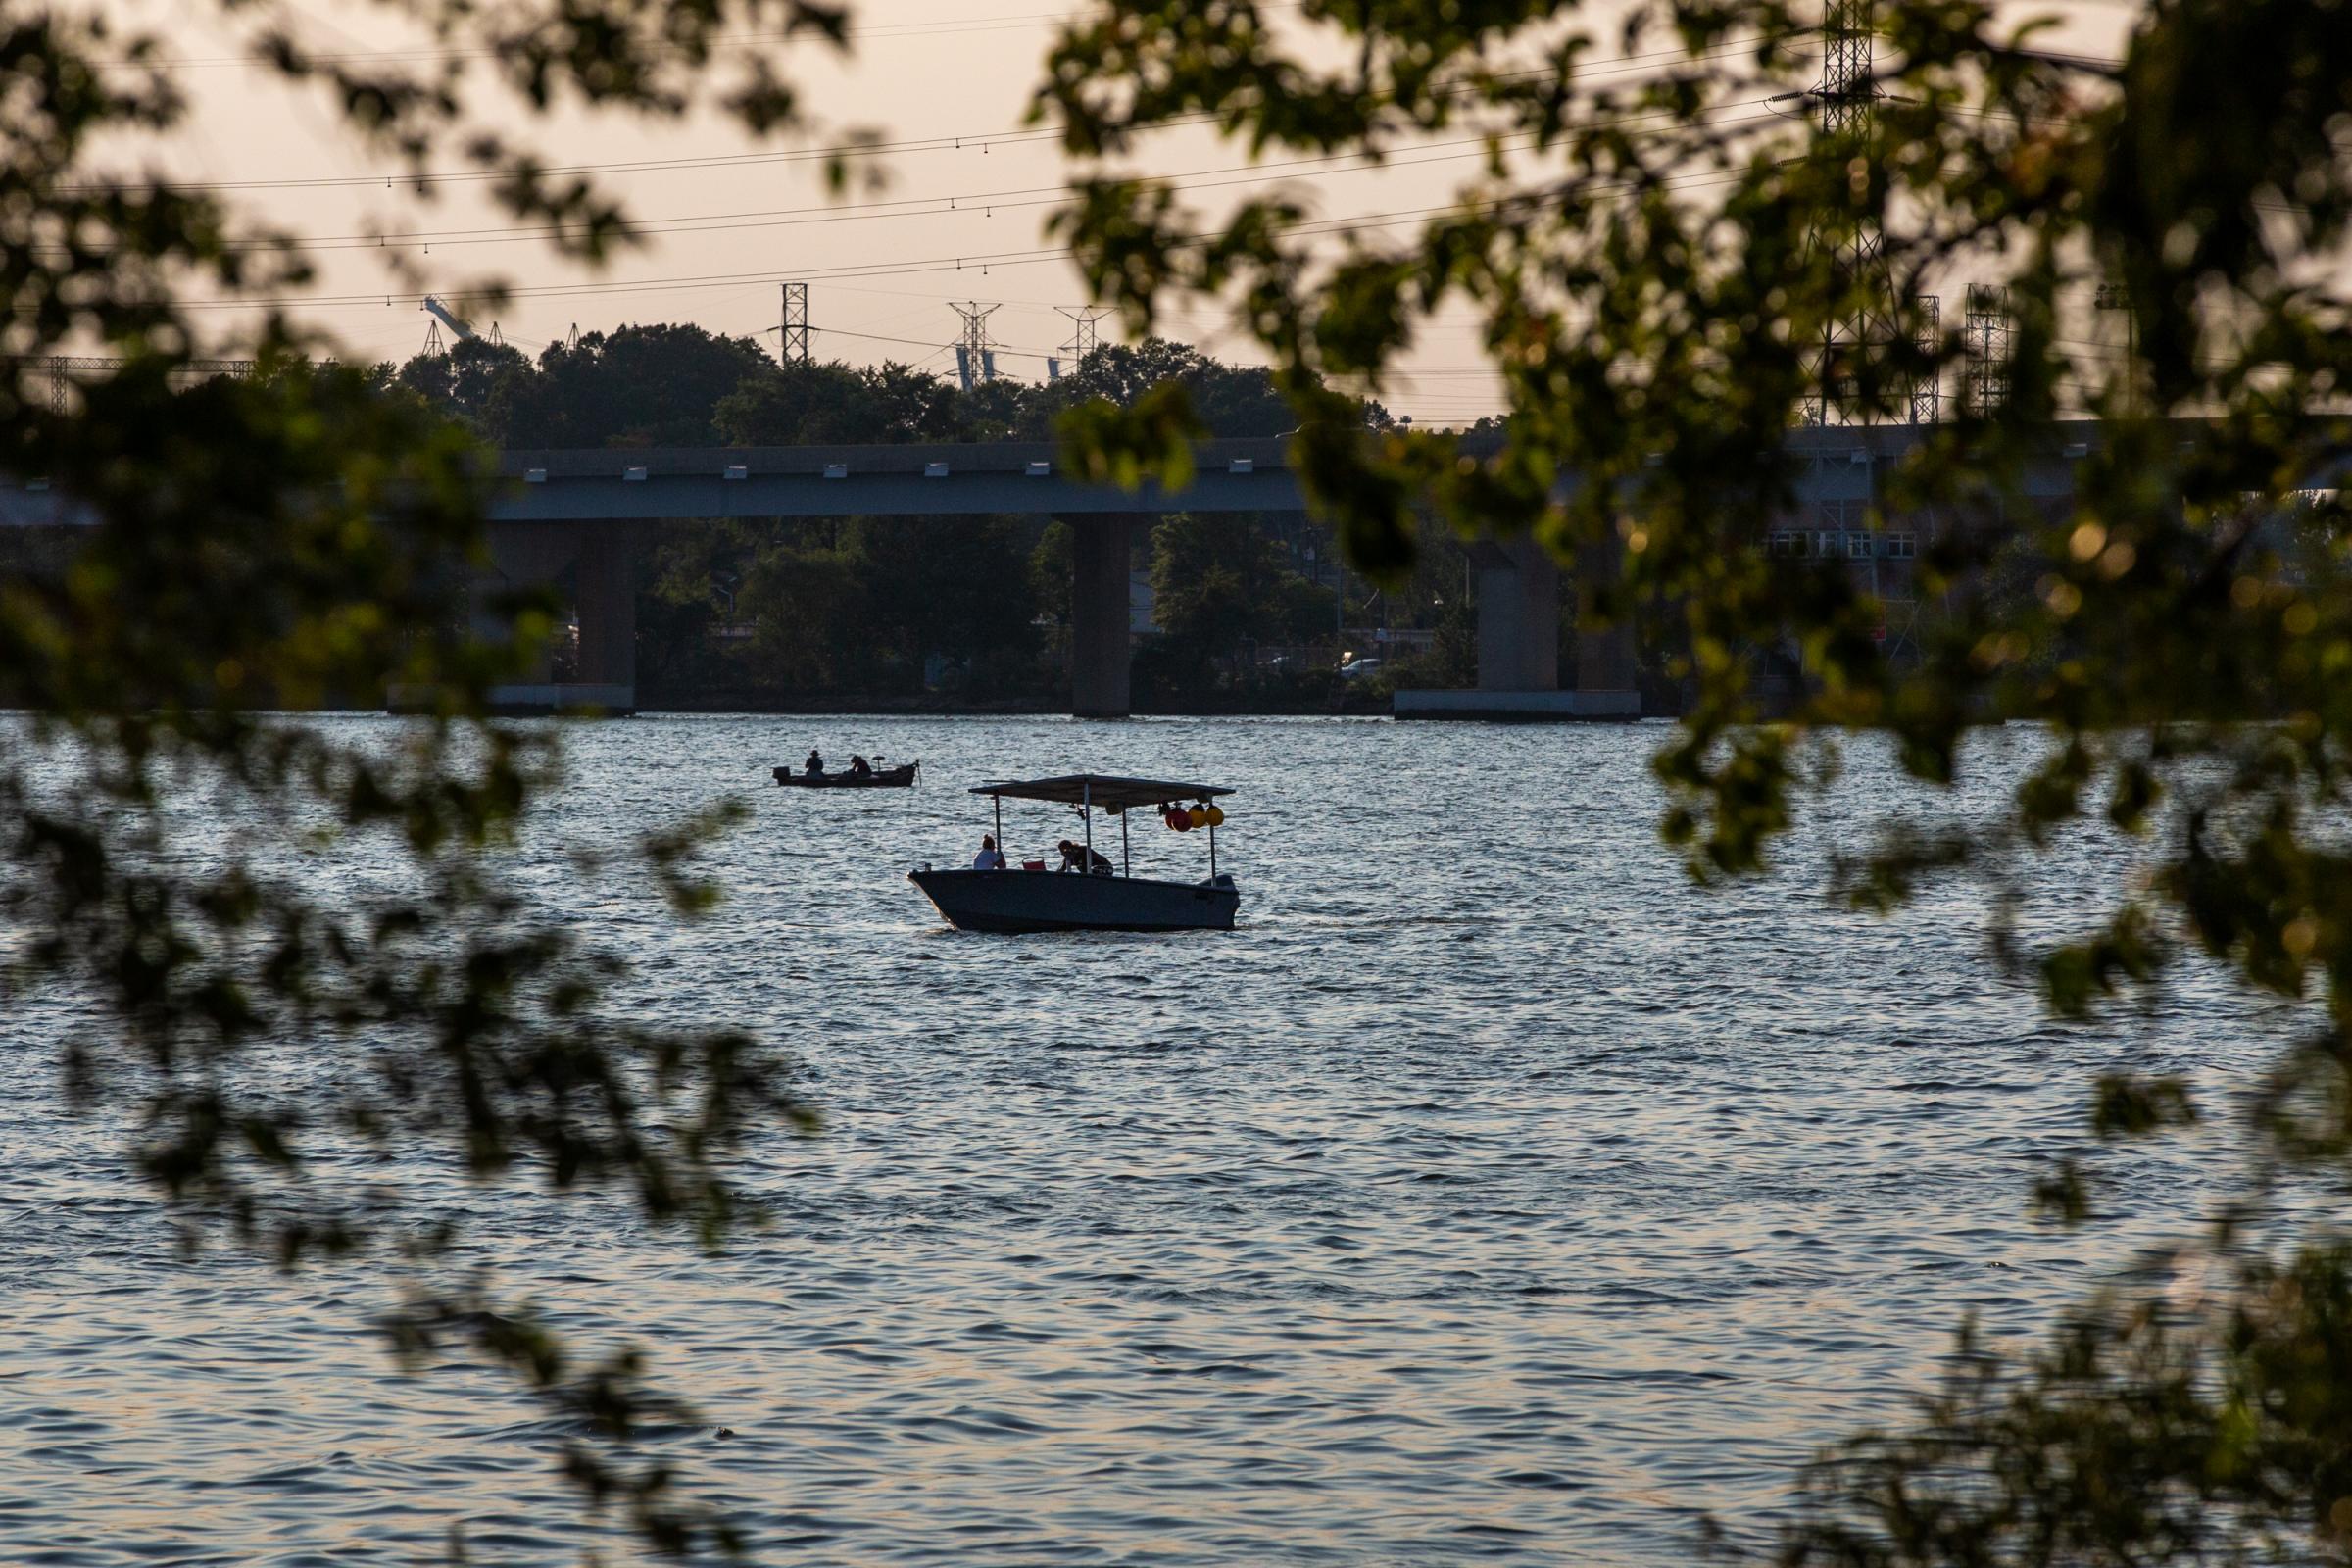 A crabbing boat floats along Bear Creek at sunset on August 5, 2021. The Environmental Protection Agency hopes to list parts of Bear Creek as a national Superfund site due to extensive contamination from years of toxic run-off from the former Bethlehem Steel Mill which was located along the creek on Sparrows Point.